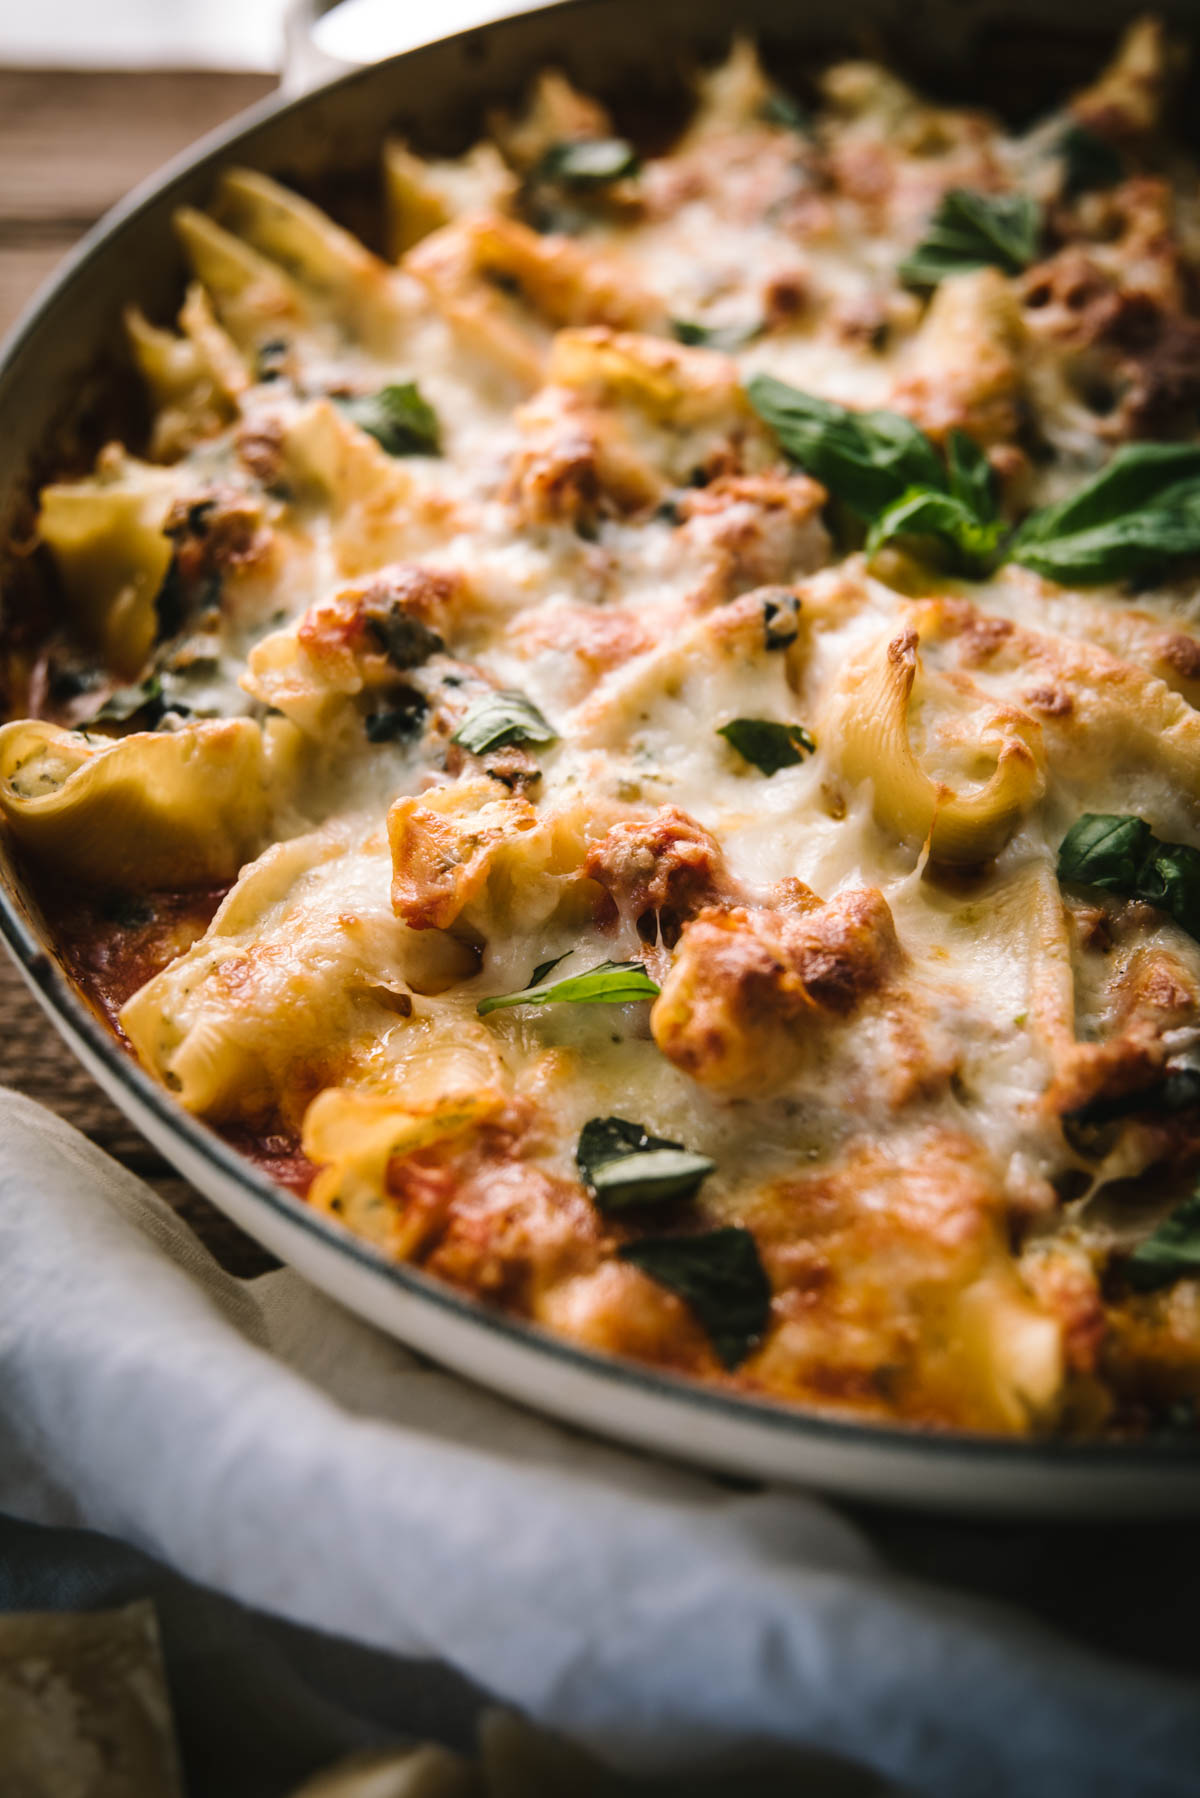 Close up side angle of stuffed shells baked with cheese. You can see all the melted cheese mixed with the sausage meat. Fresh basil is used to garnish.